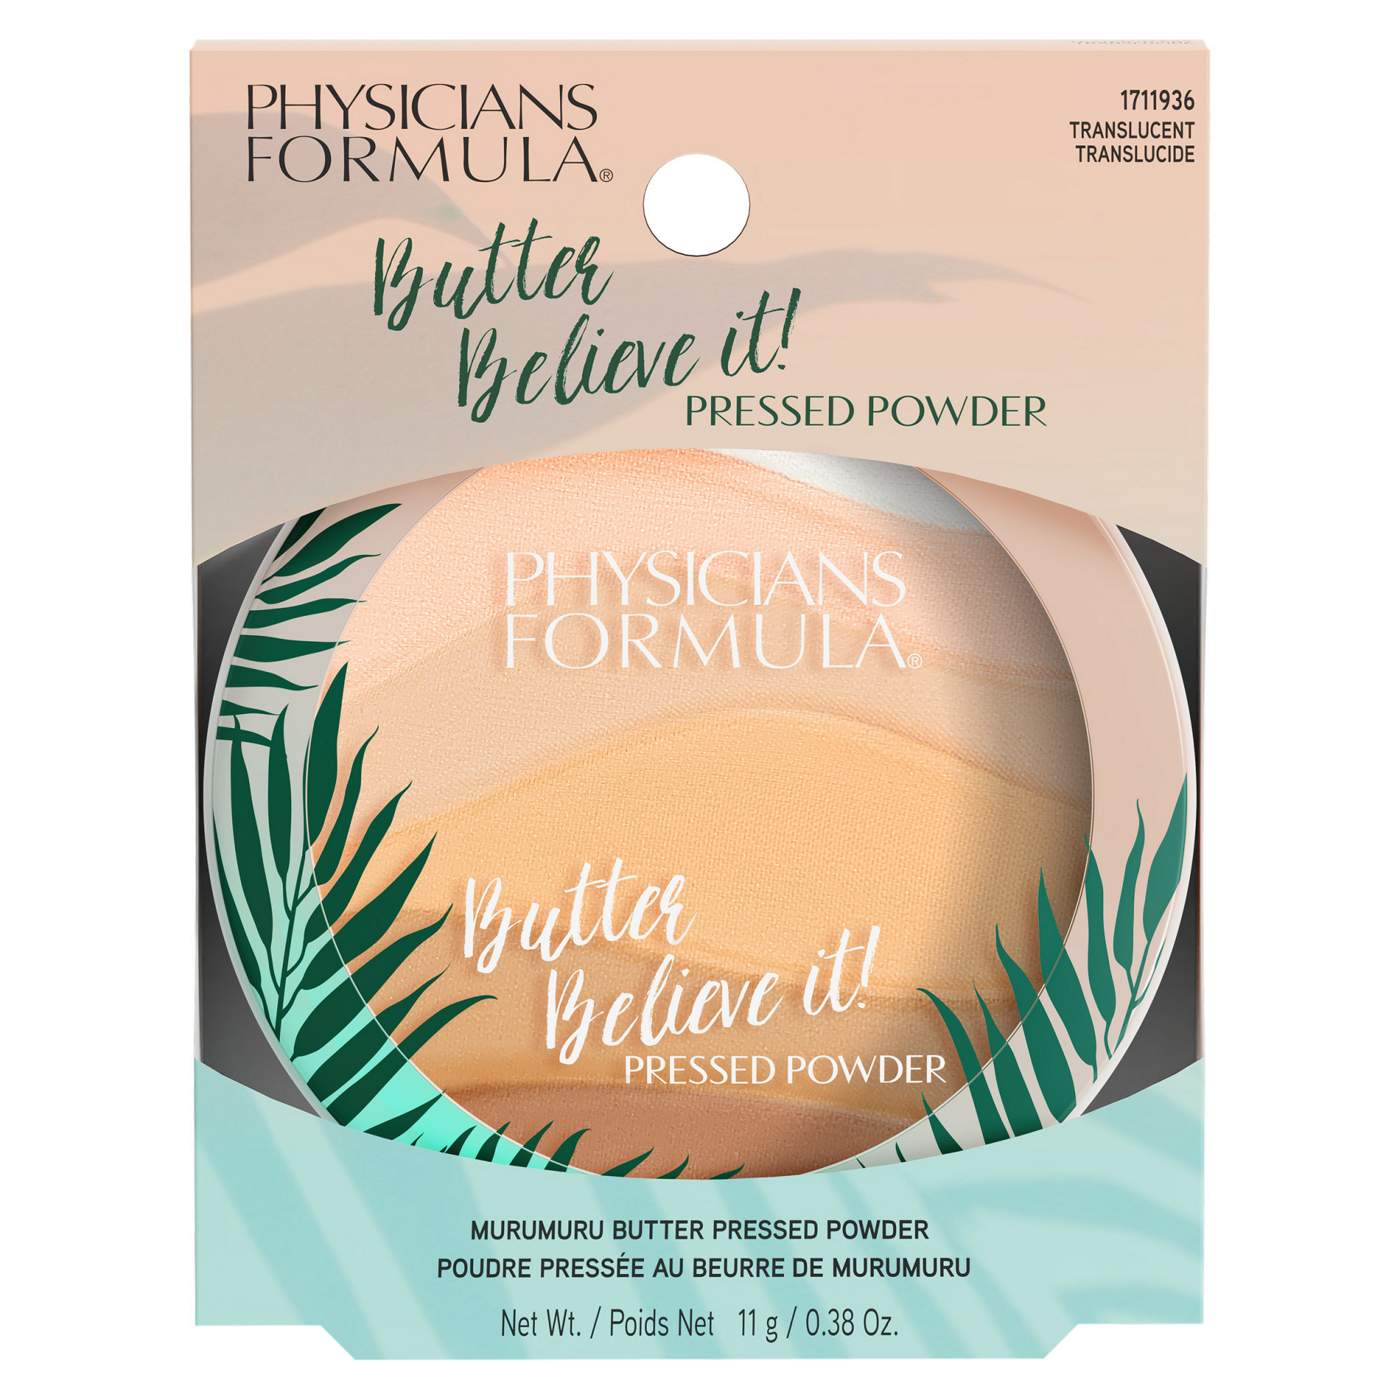 Physicians Formula Butter Believe It! Pressed Powder Translucent; image 1 of 5